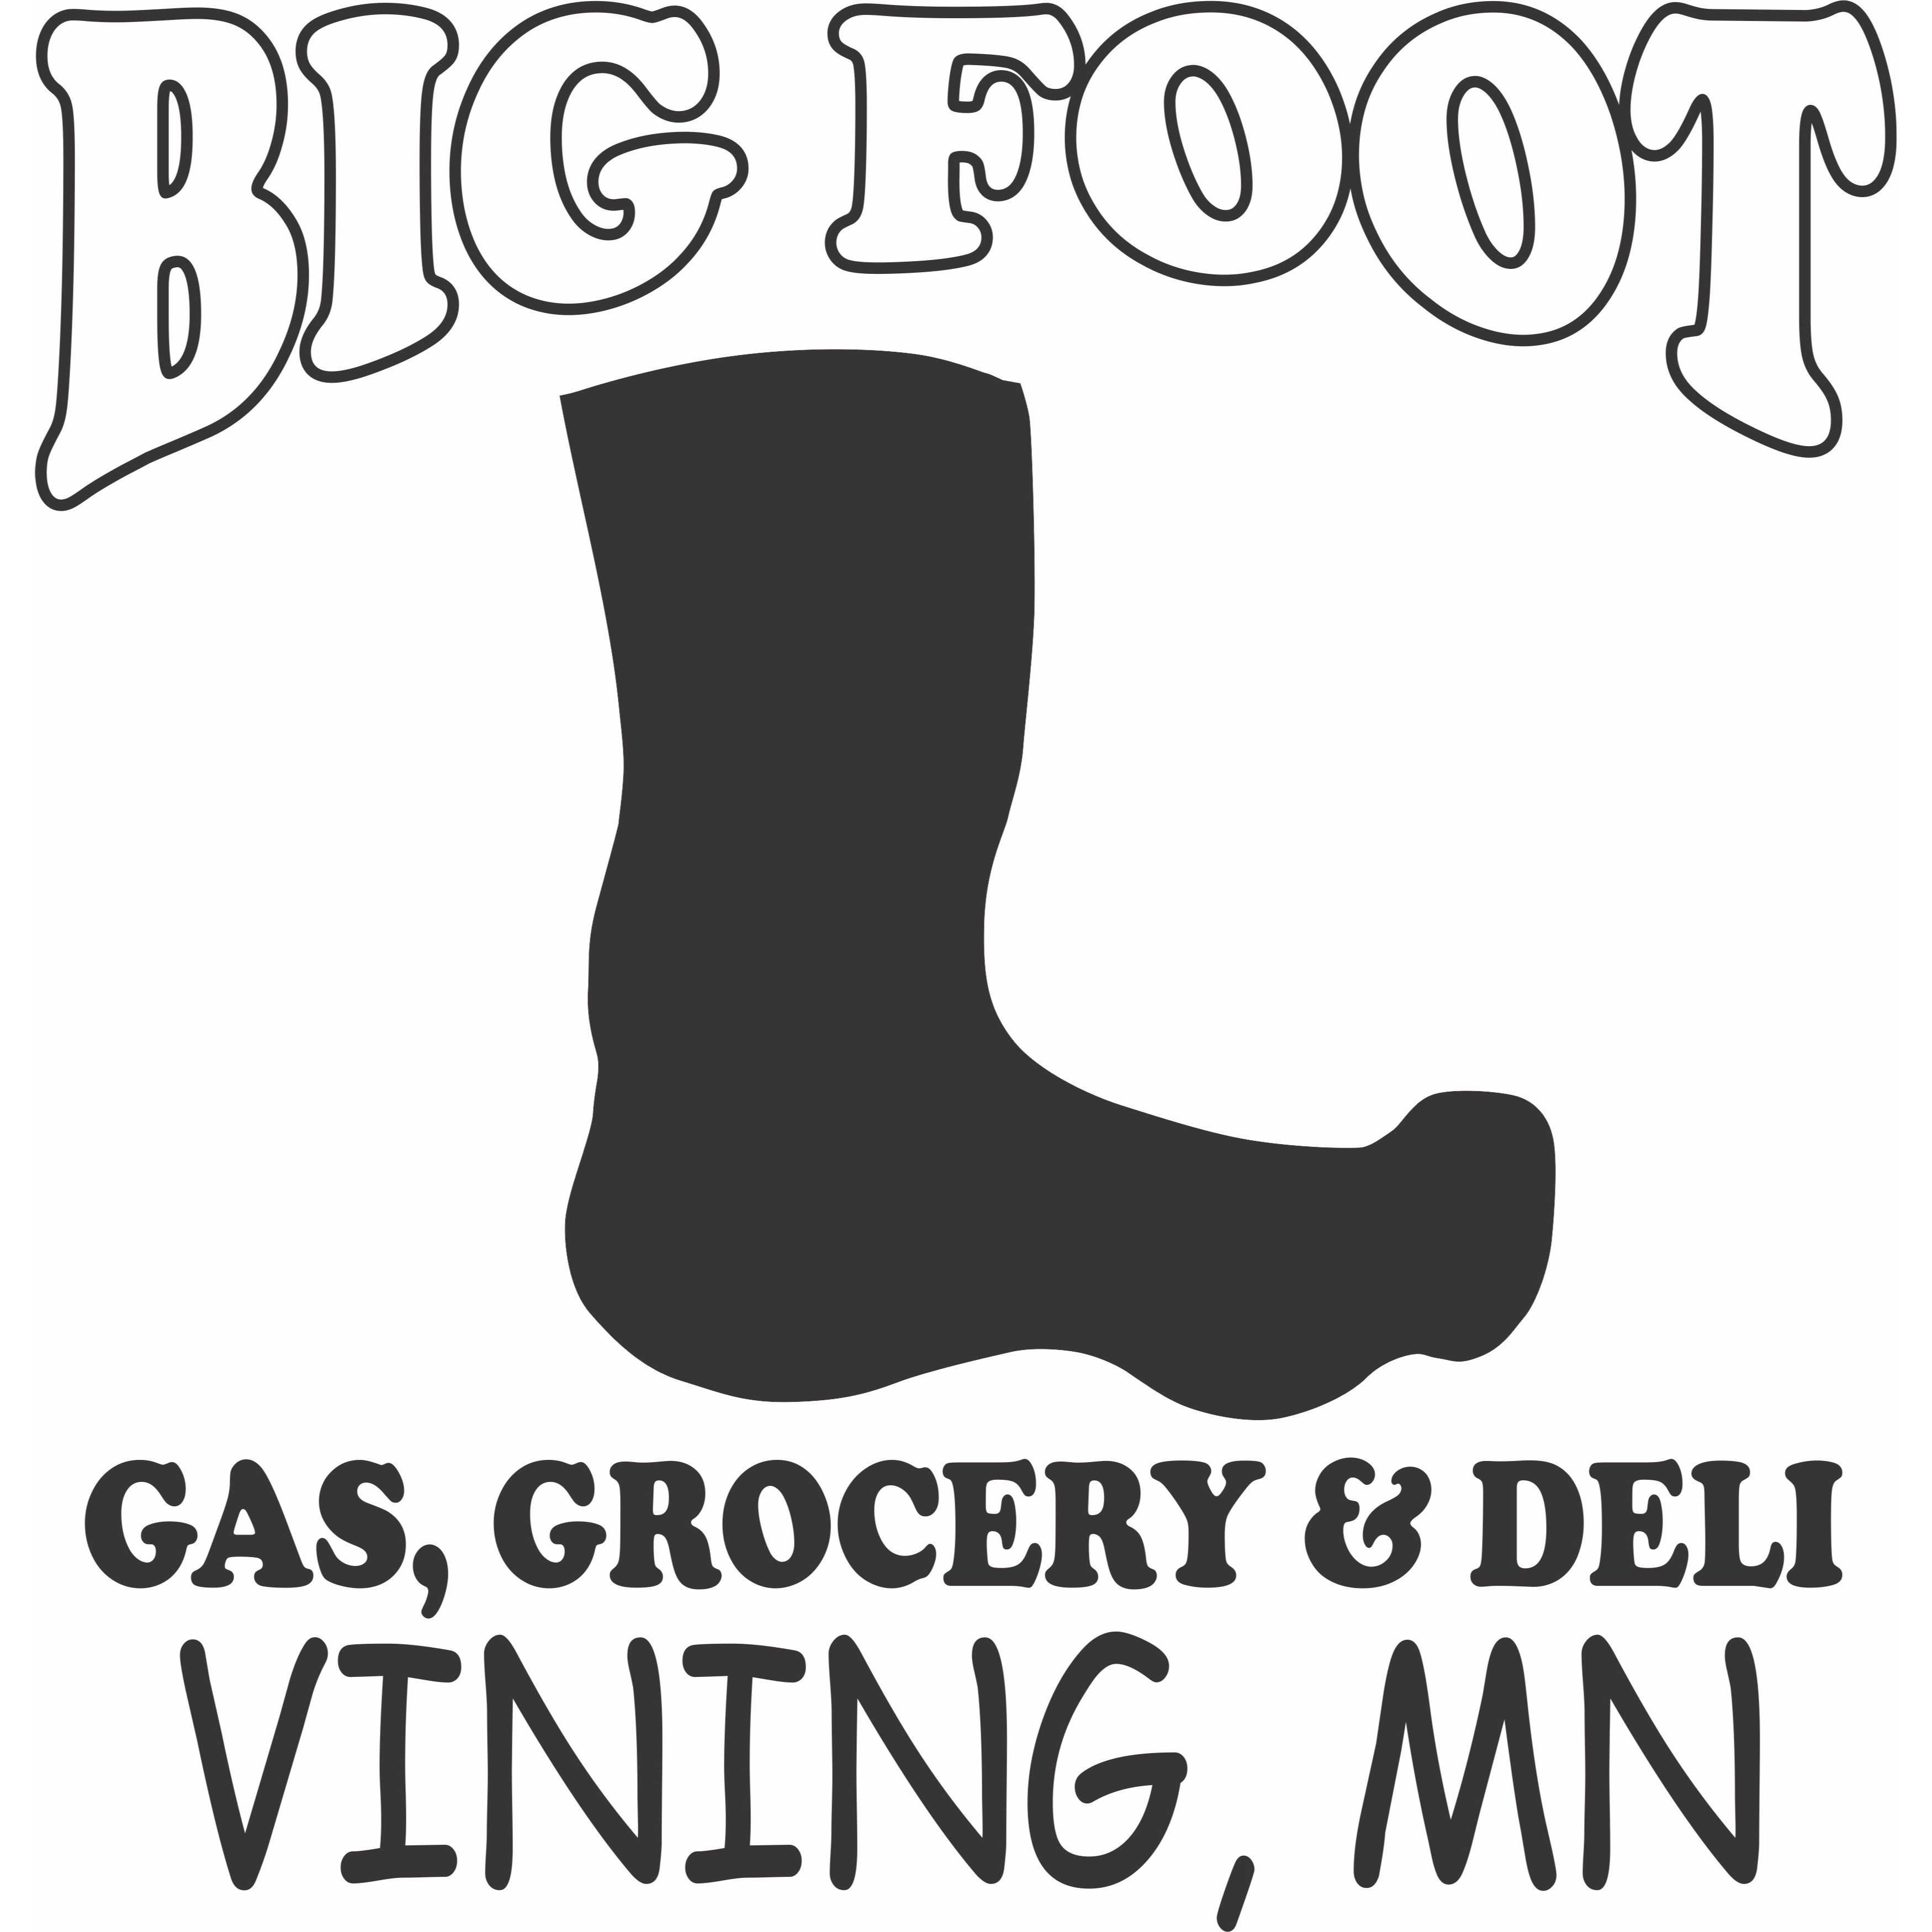 Big Foot Gas & Grocery - Vining, MN 56588 - (218)769-4484 | ShowMeLocal.com